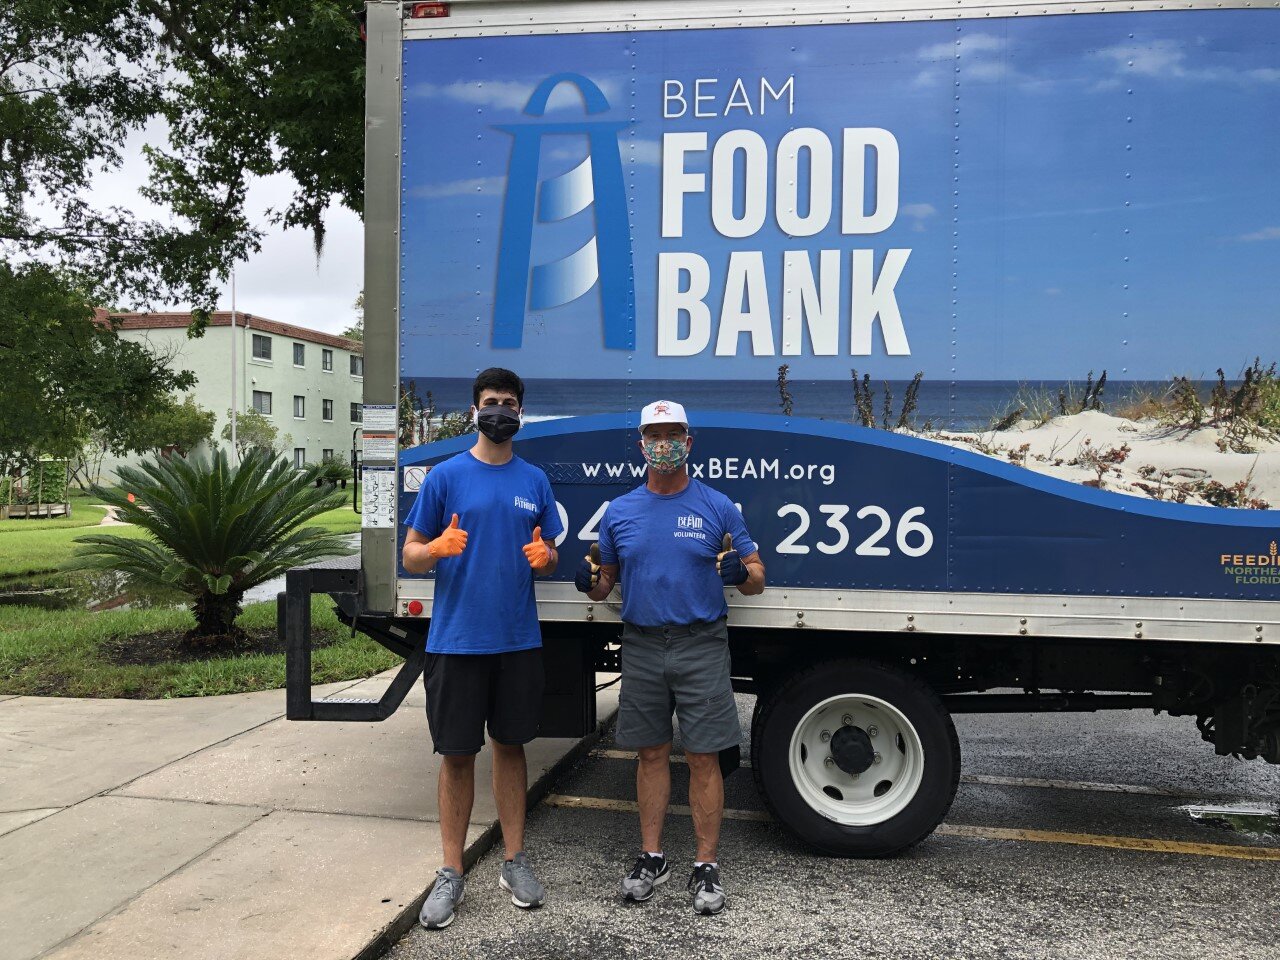 Connor and BEAM Volunteer Geoff, feeling good after their delivery of 1,200 pounds of fresh groceries to Pablo Hamlet senior residents.